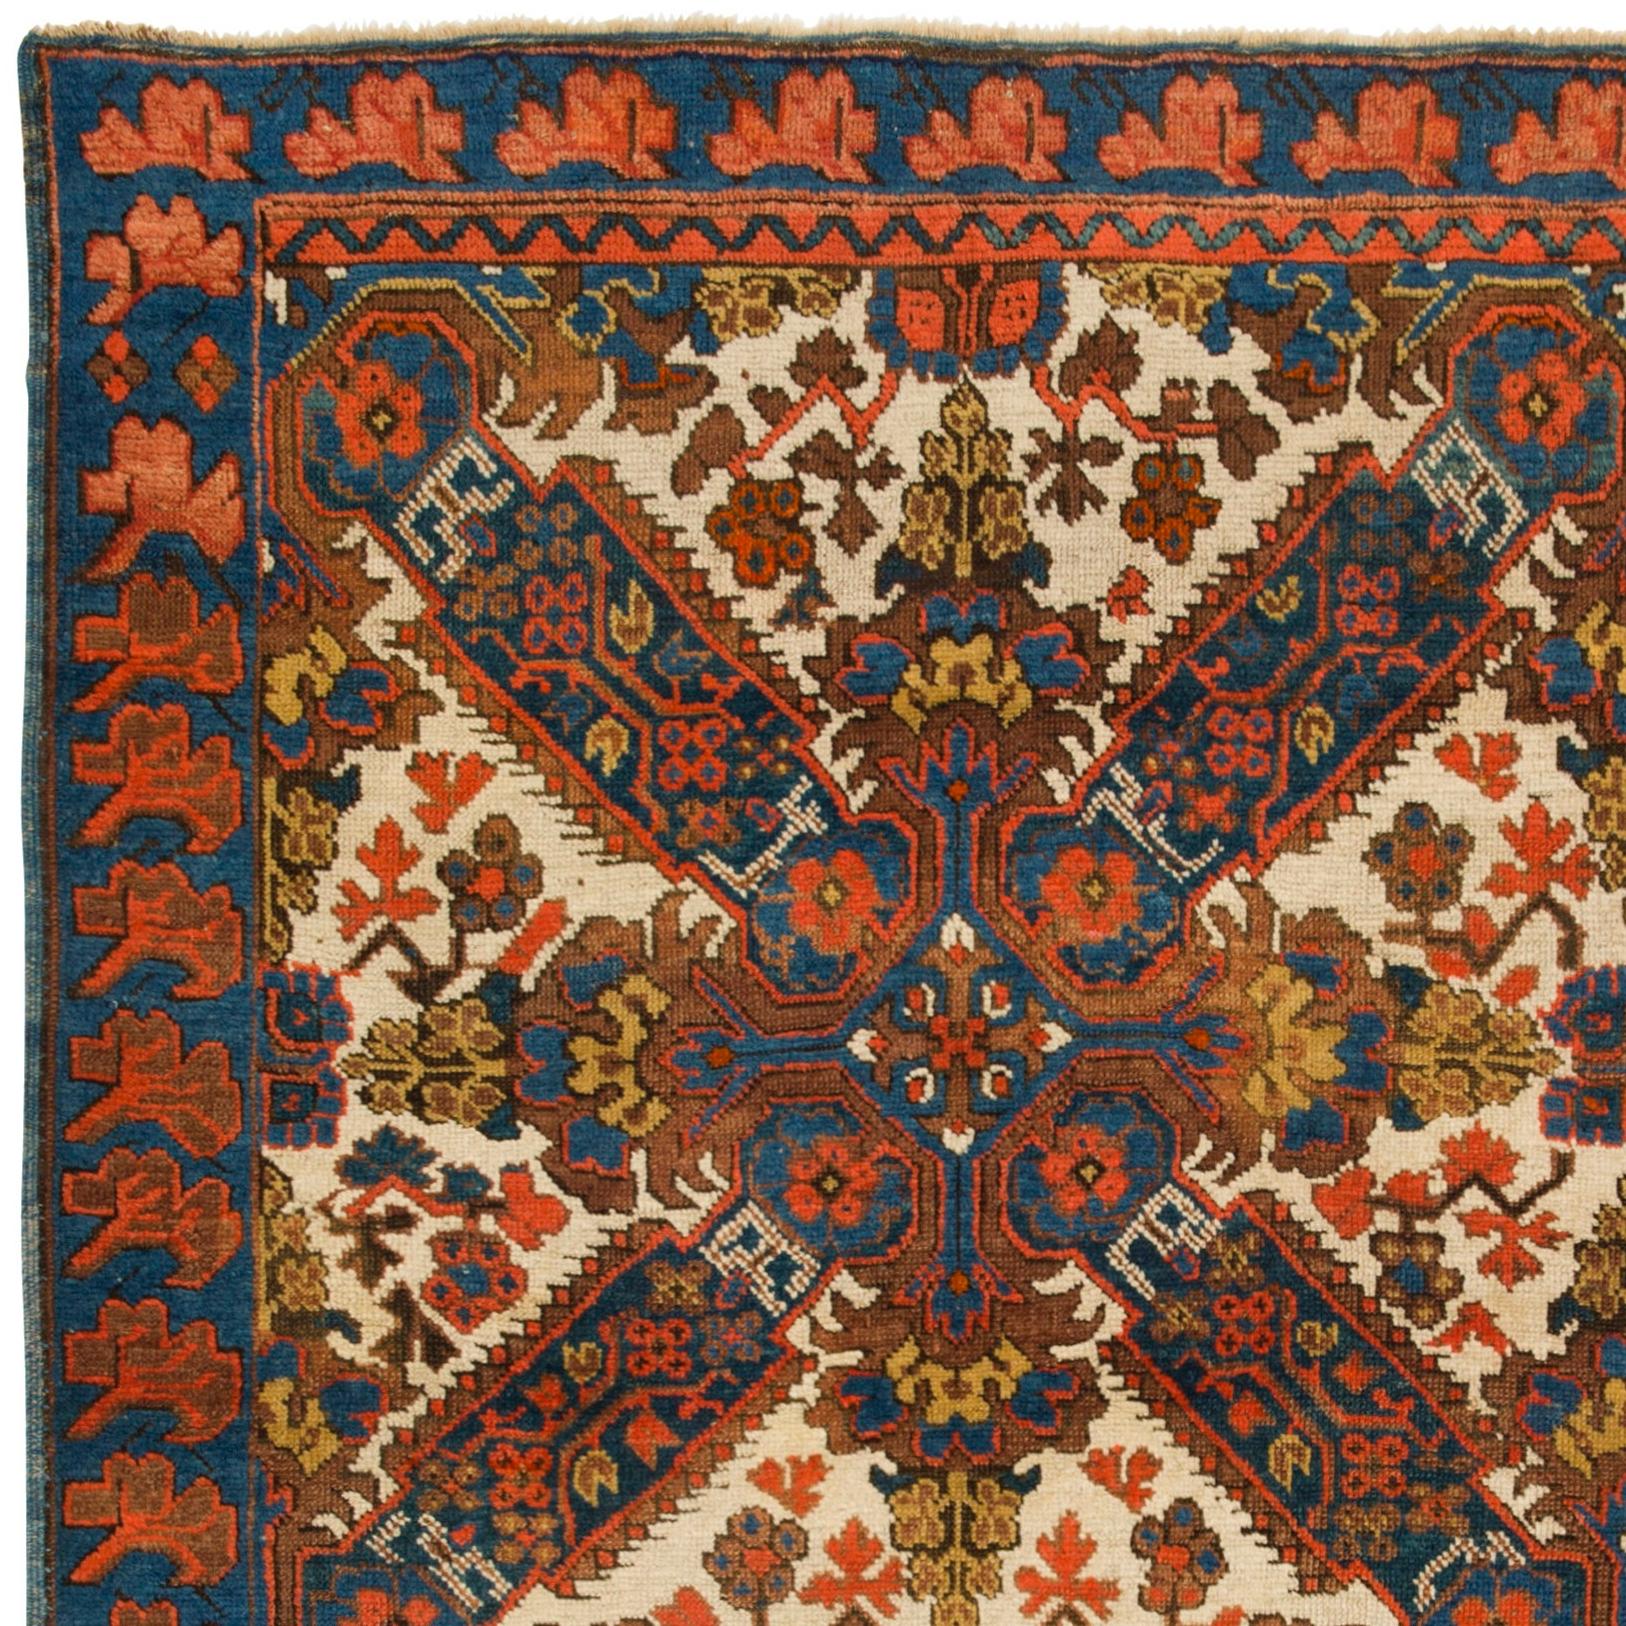 Antique Caucasian Seichur rug, circa 1890. 
Finely hand-knotted with even medium wool pile on wool foundation. 
Origin good condition. Washed professionally. All natural dyes.
Size: 3.5x5 ft